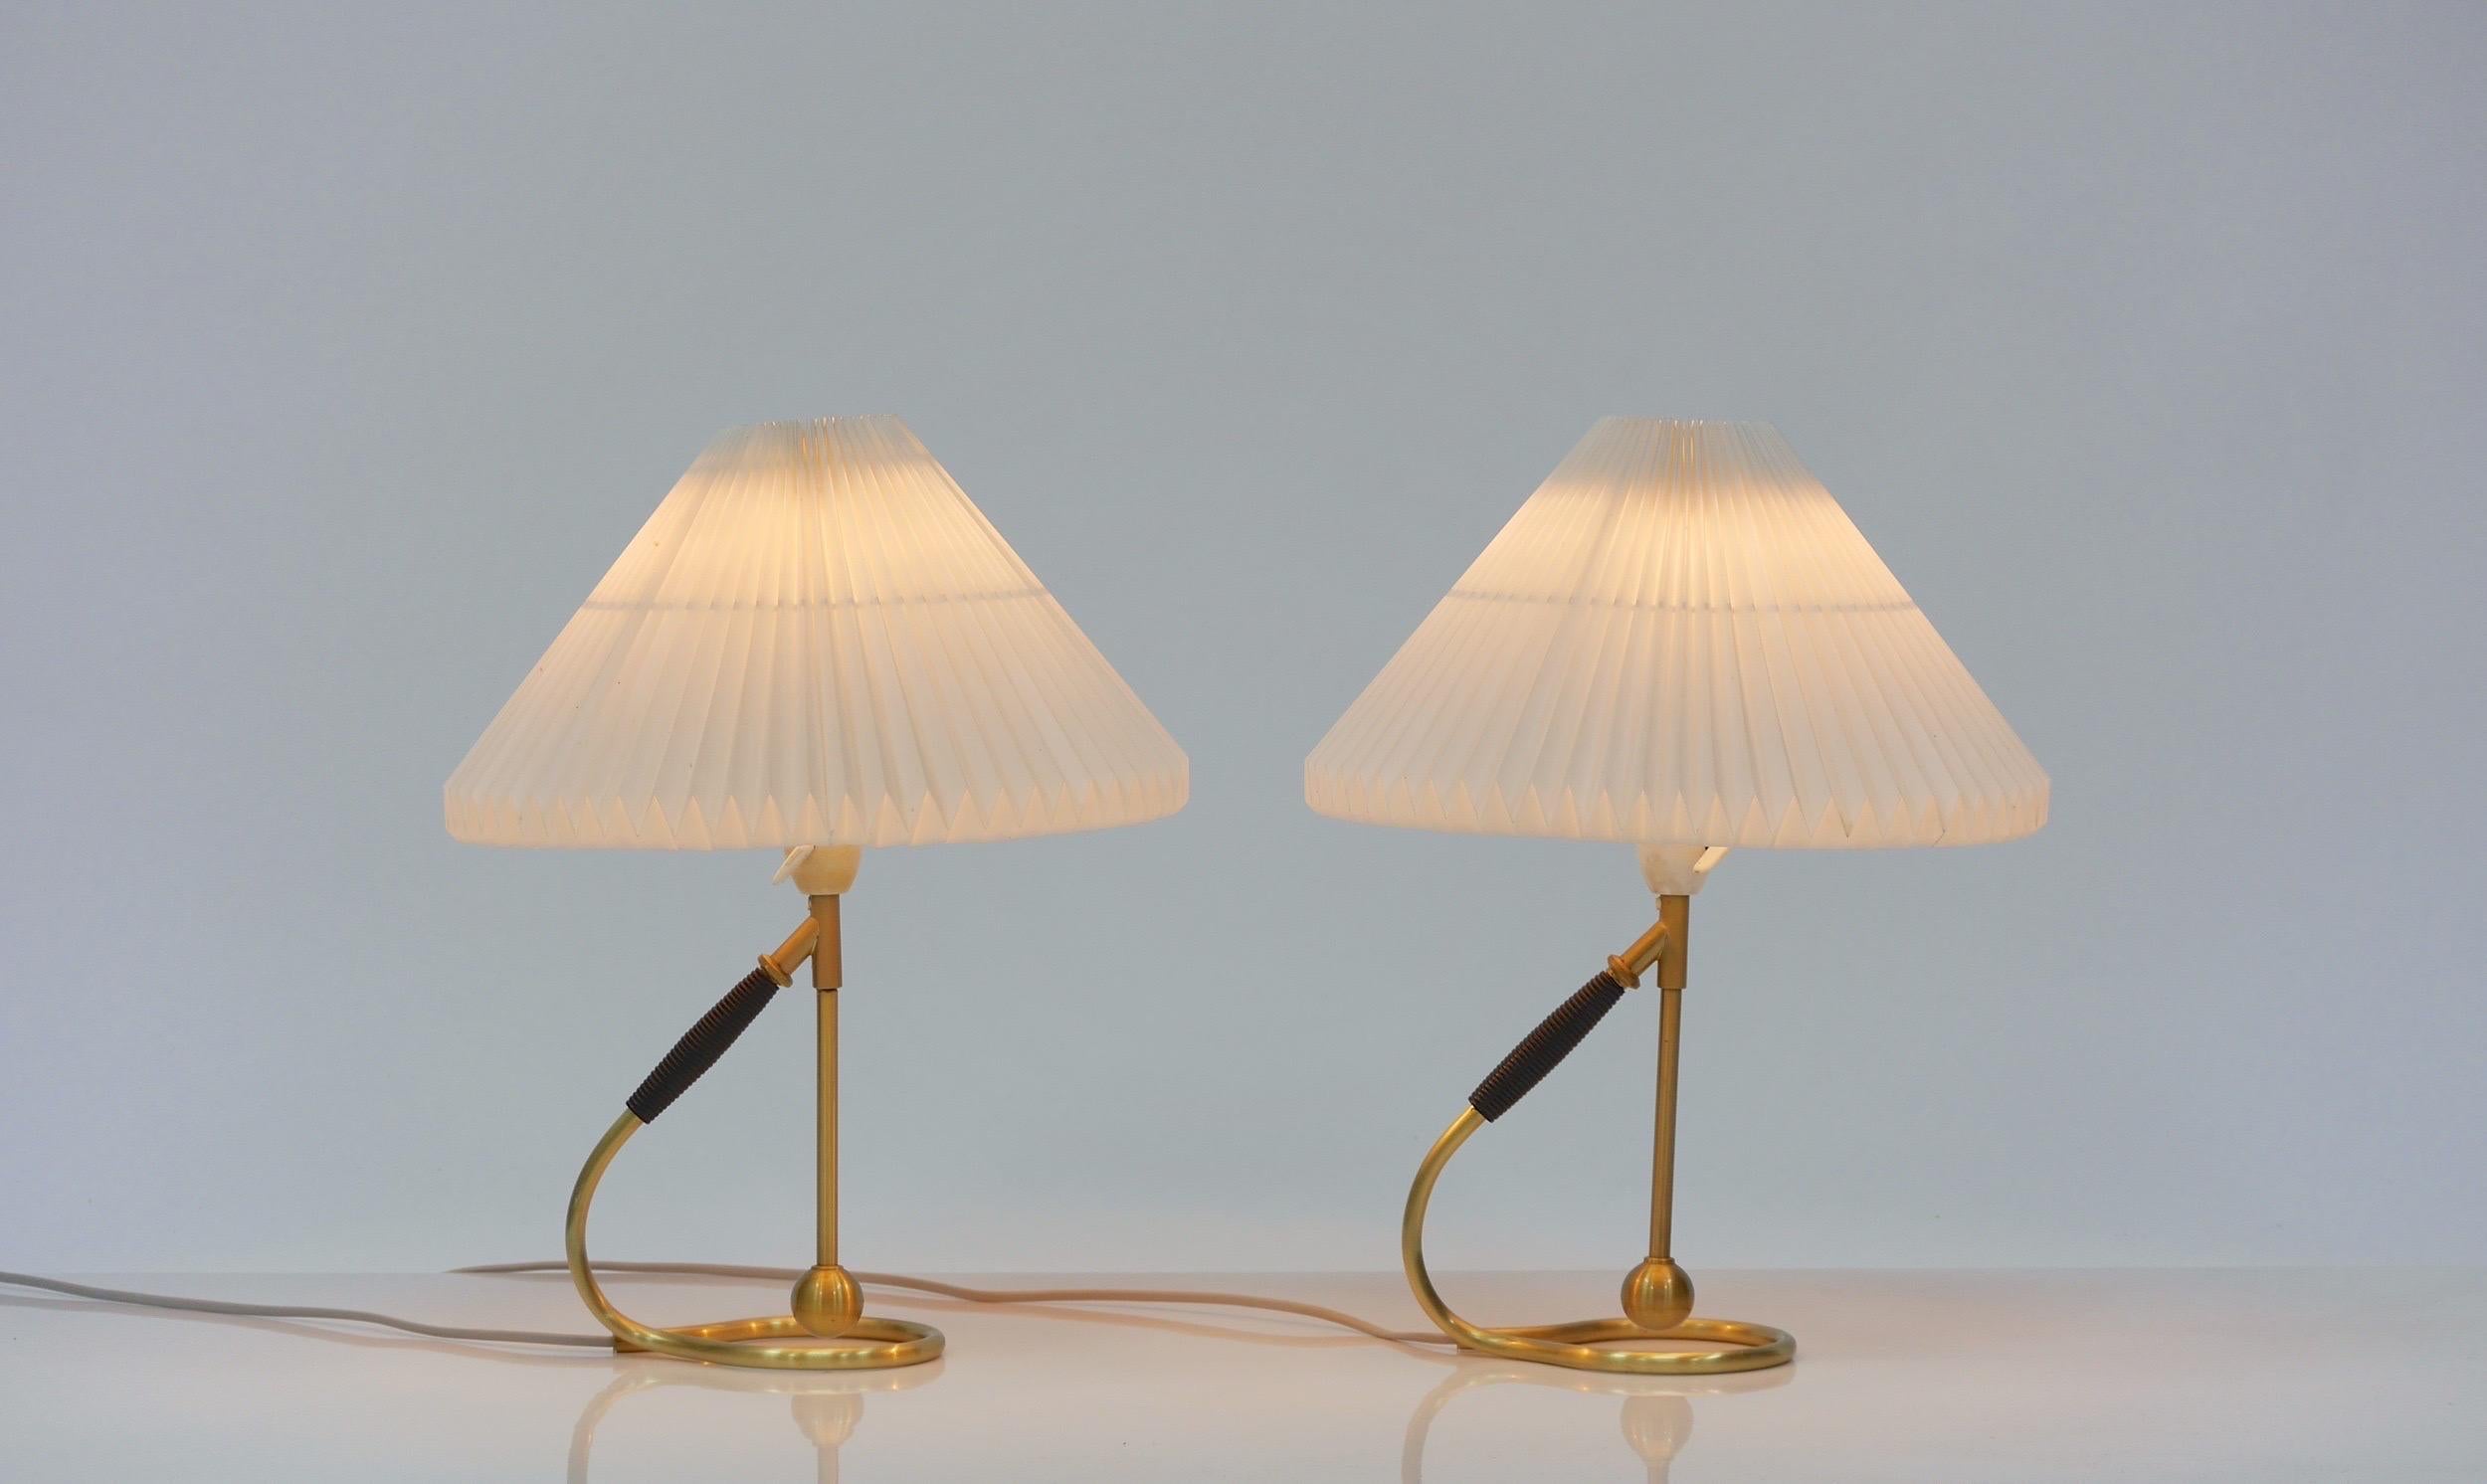 Pair of vintage Le Klint 306 table/ wall lamps( Kip-lampen in Danish ) This versatile lamp was designed by Kaare Klint in 1945. With it’s tilt function the design easily converts from a table lamp to wall sconce and vice versa. This adjustable